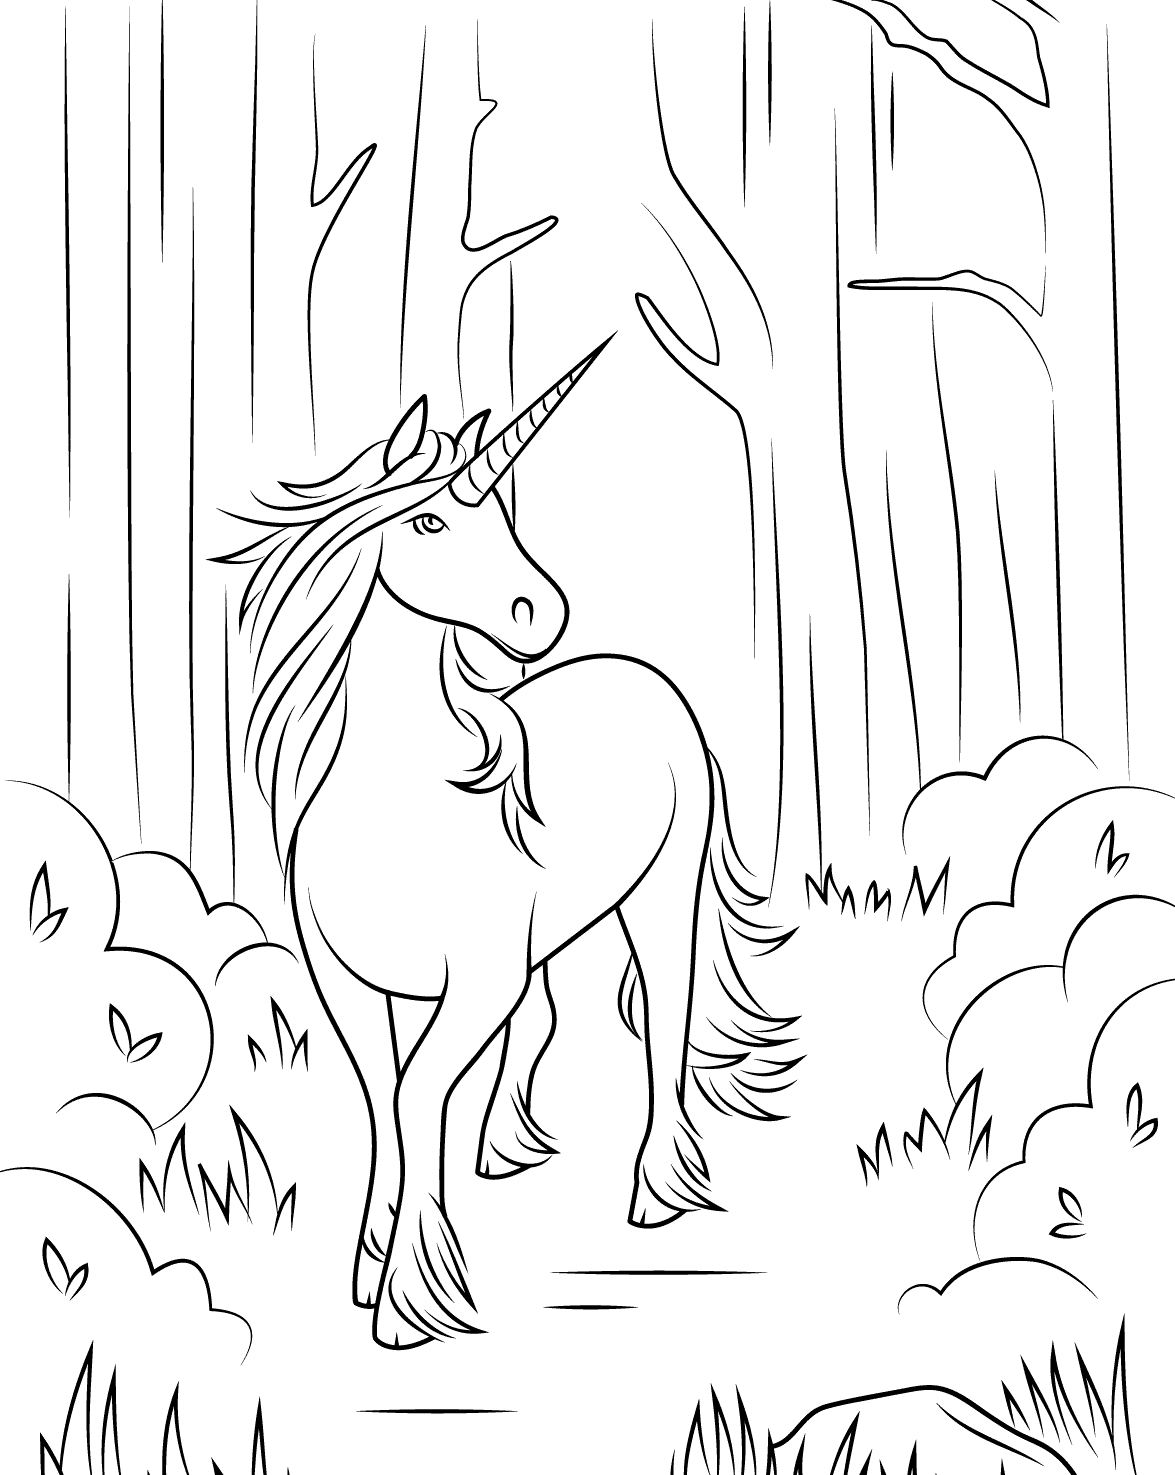 Unicorn Coloring Pages For Adults   Best Coloring Pages For Kids ...